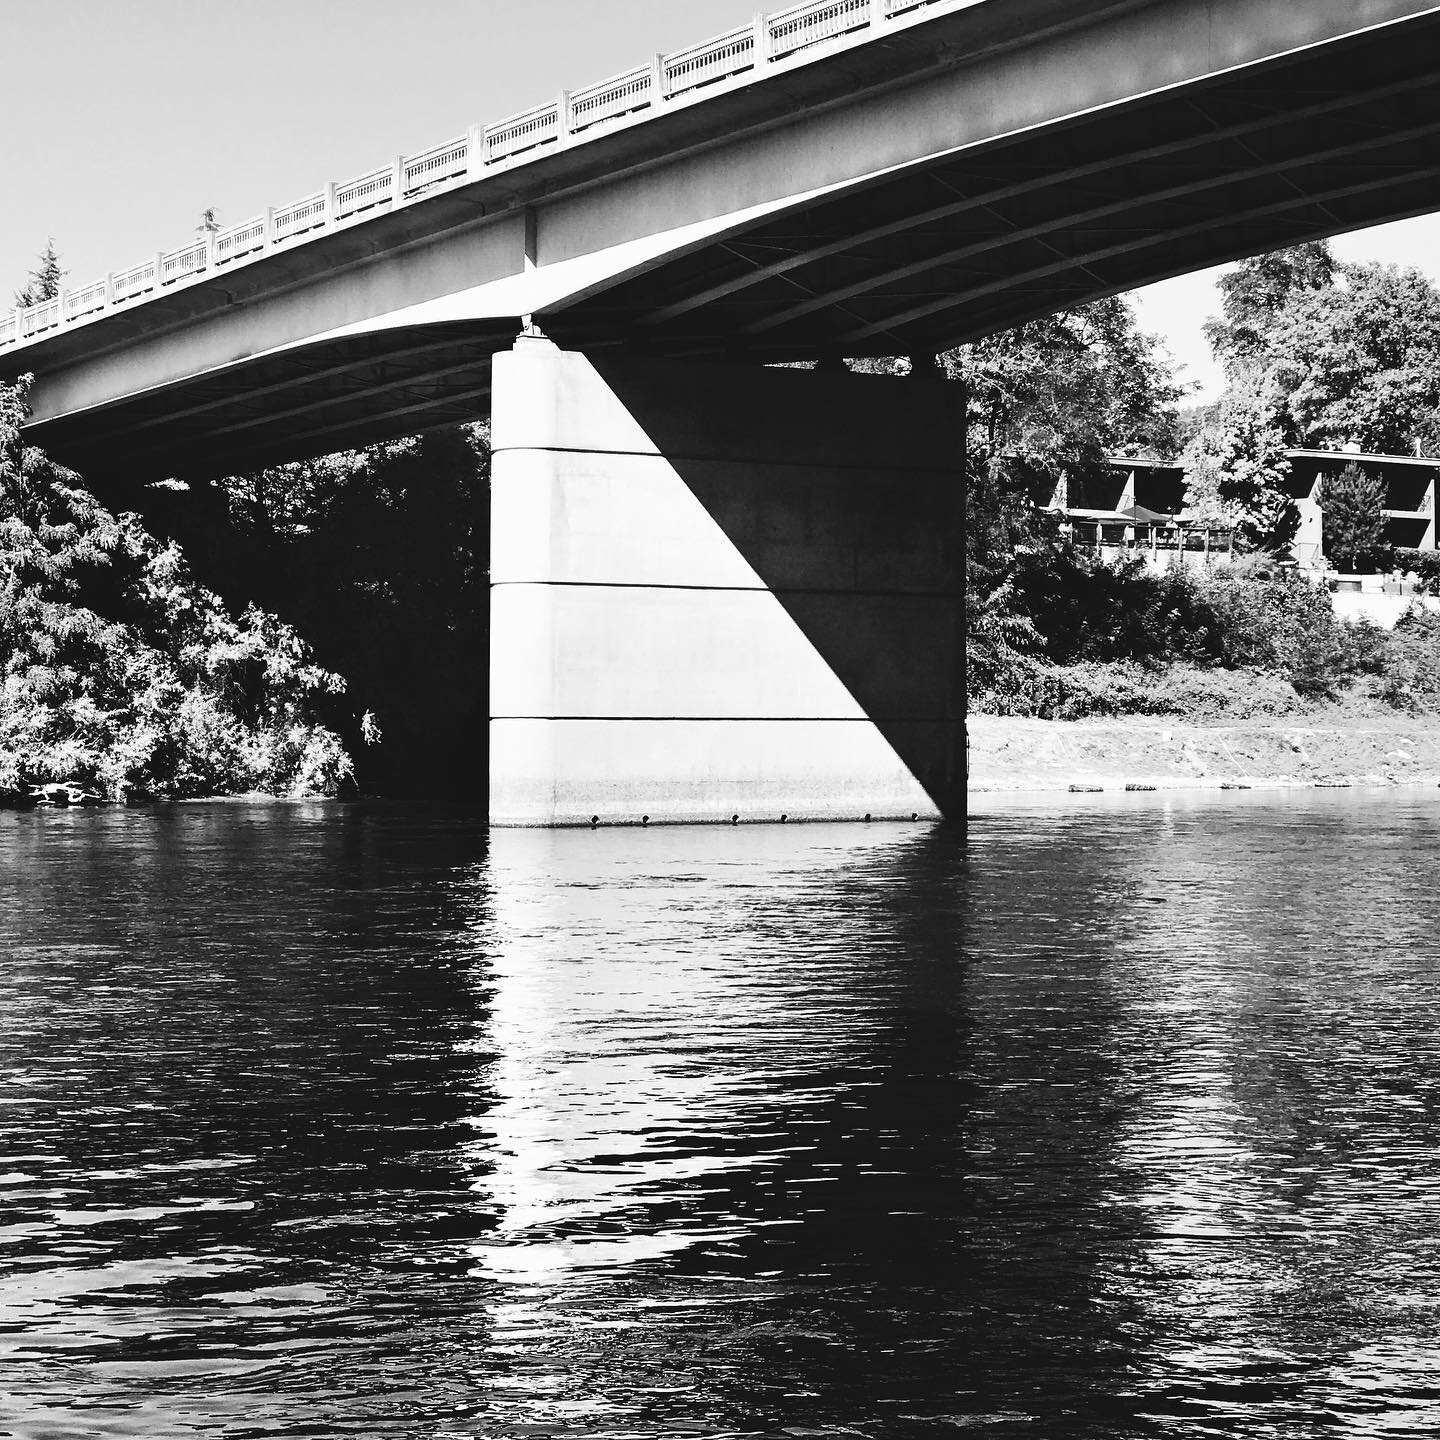 Rogue River Overpass. #bw #bwphotograpy #rogueriver #diagonal_symmetry #water #reflection